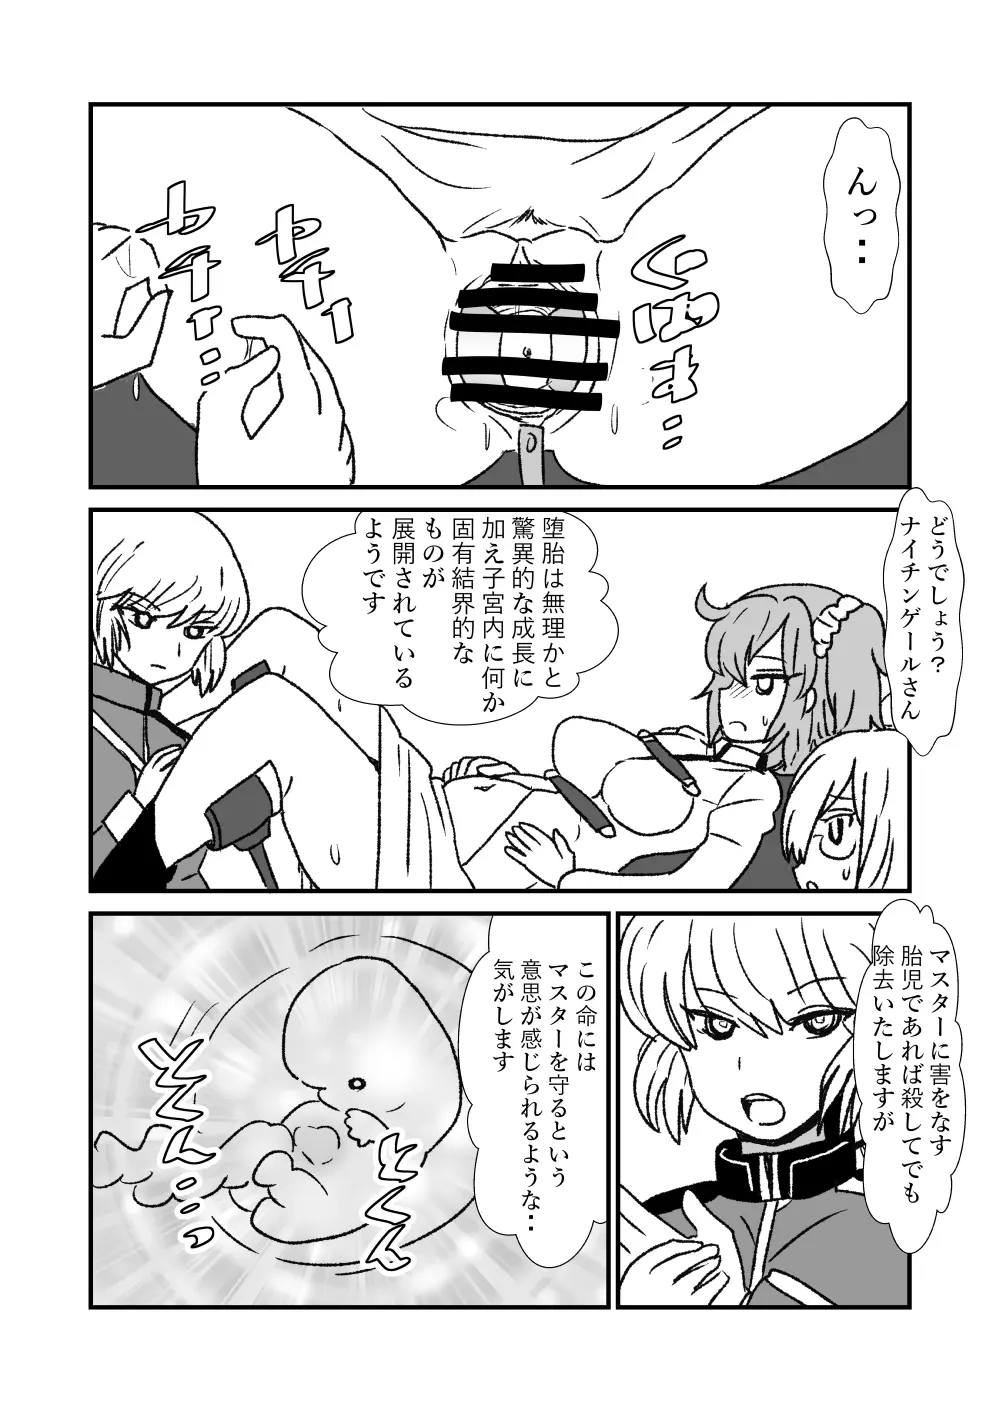 FPO~桃色林檎の種付け周回～ - page30